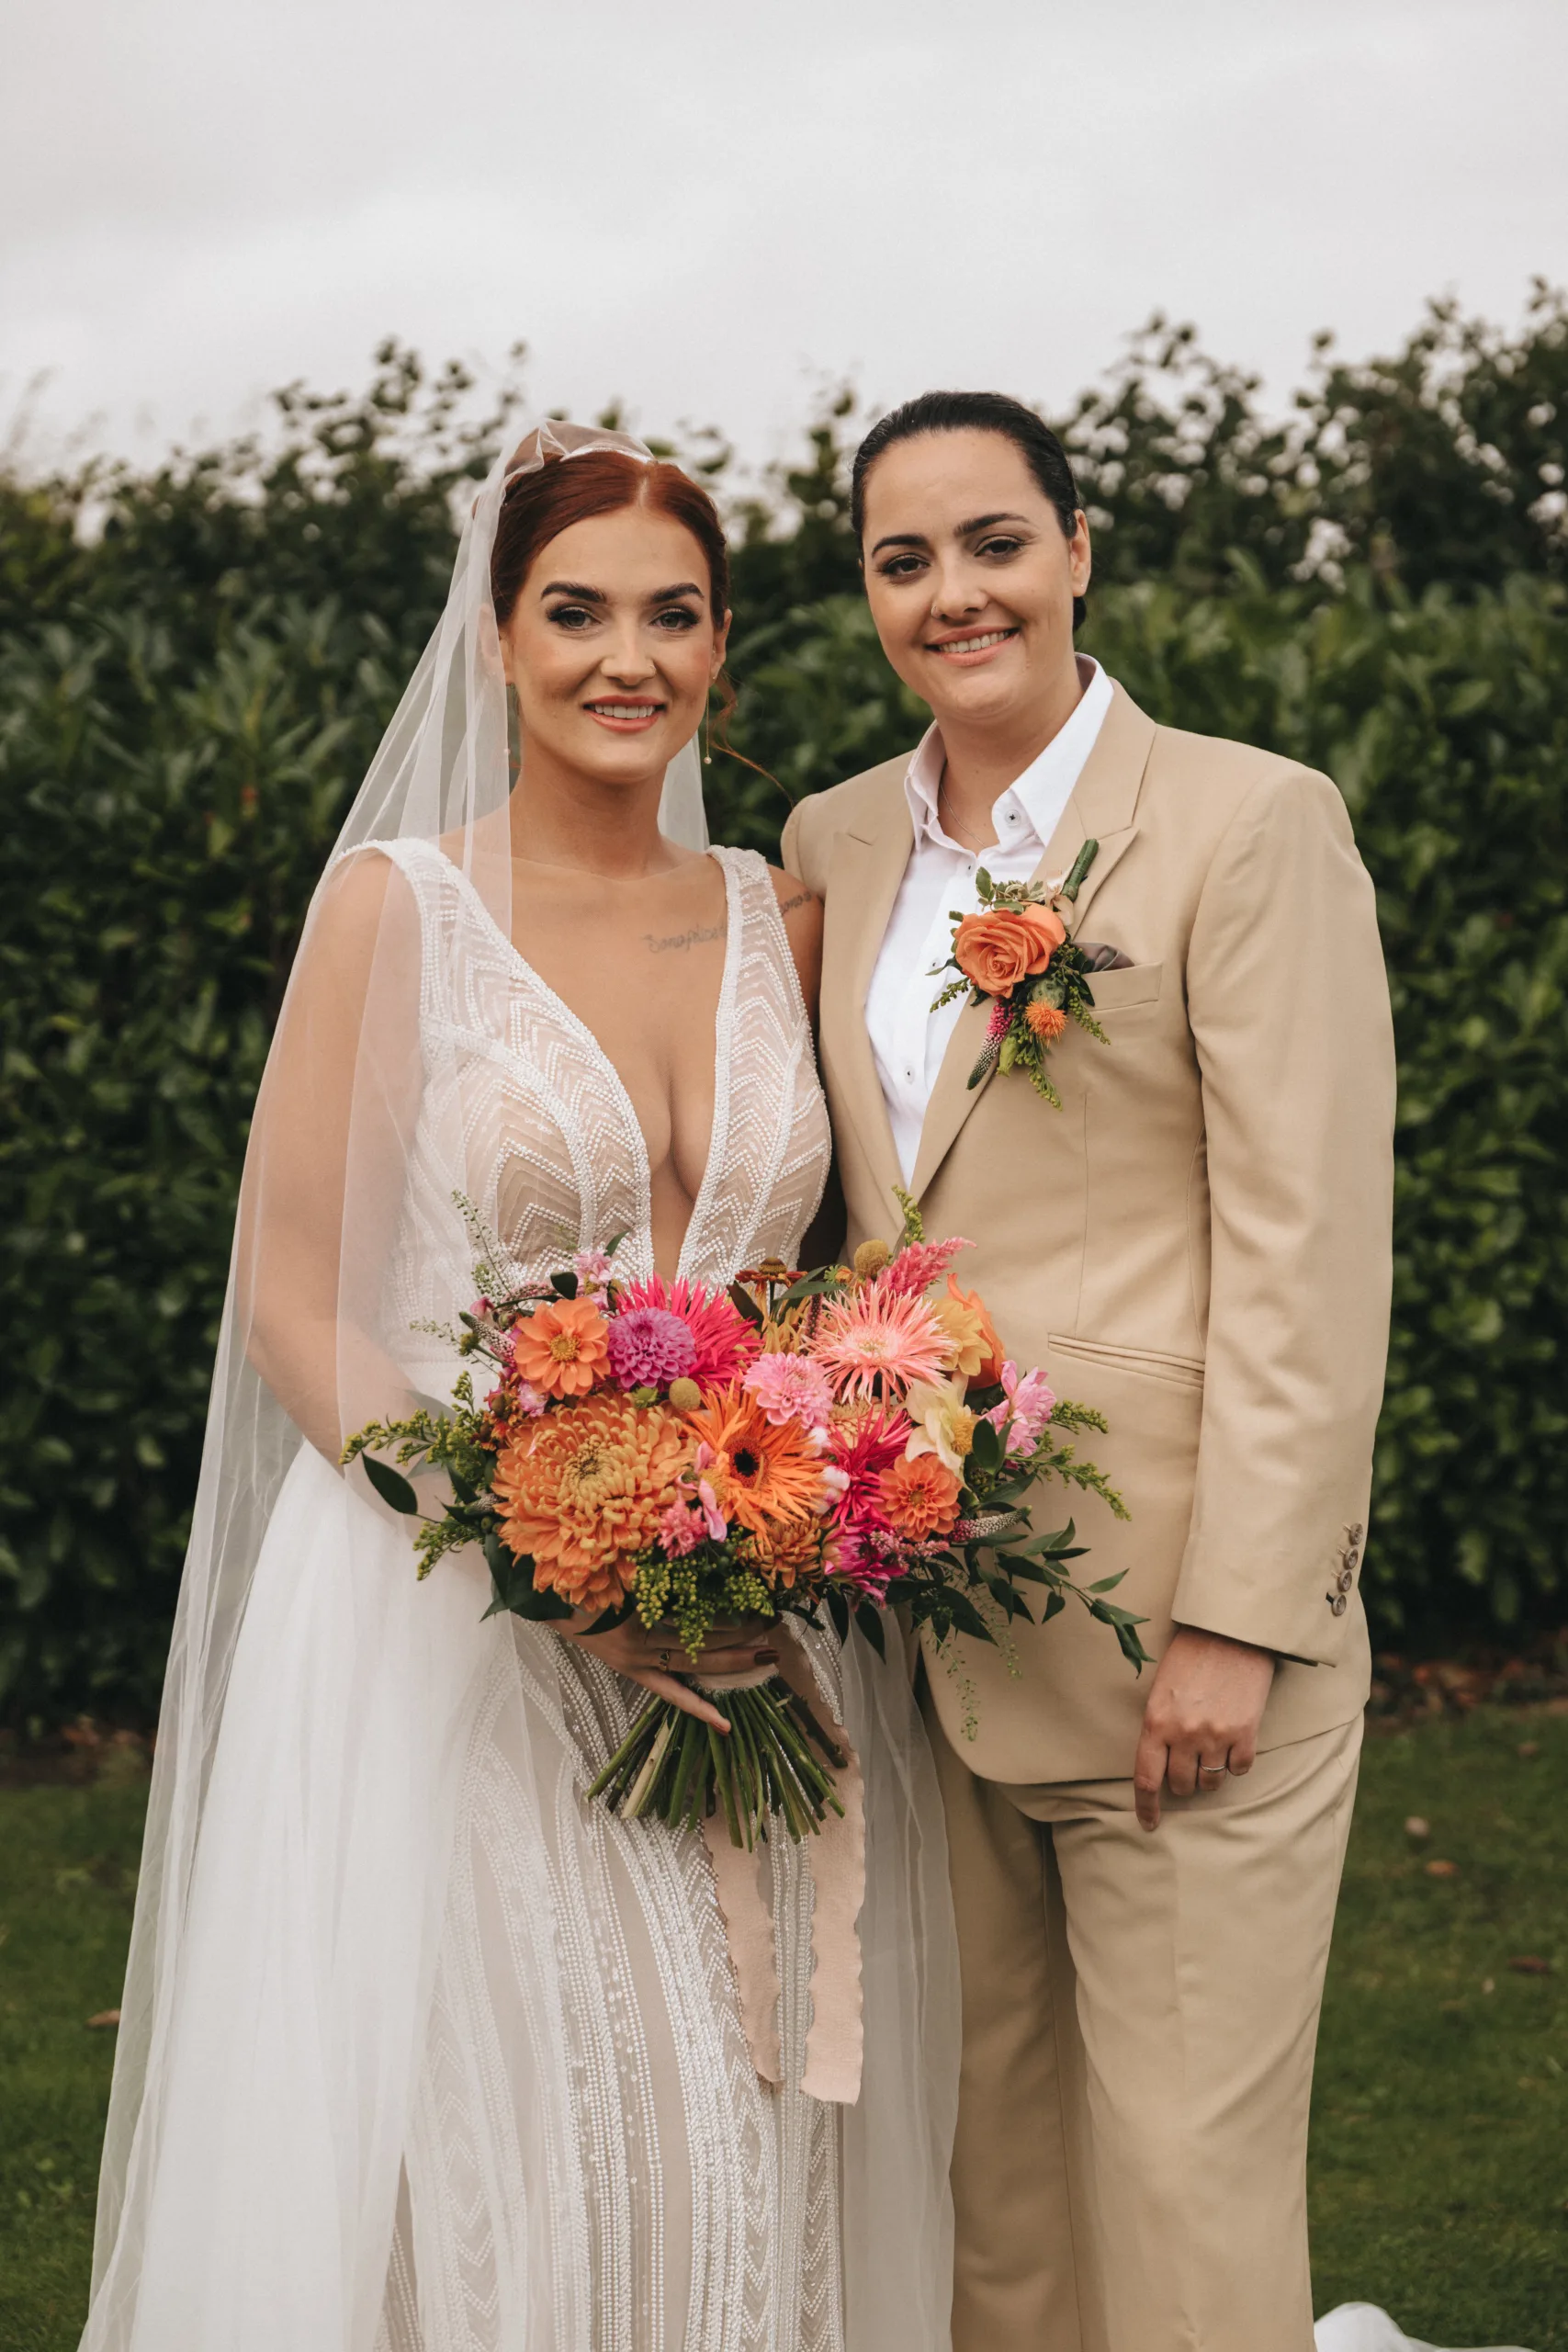 Two brides posing for a wedding photo in a tan suit.